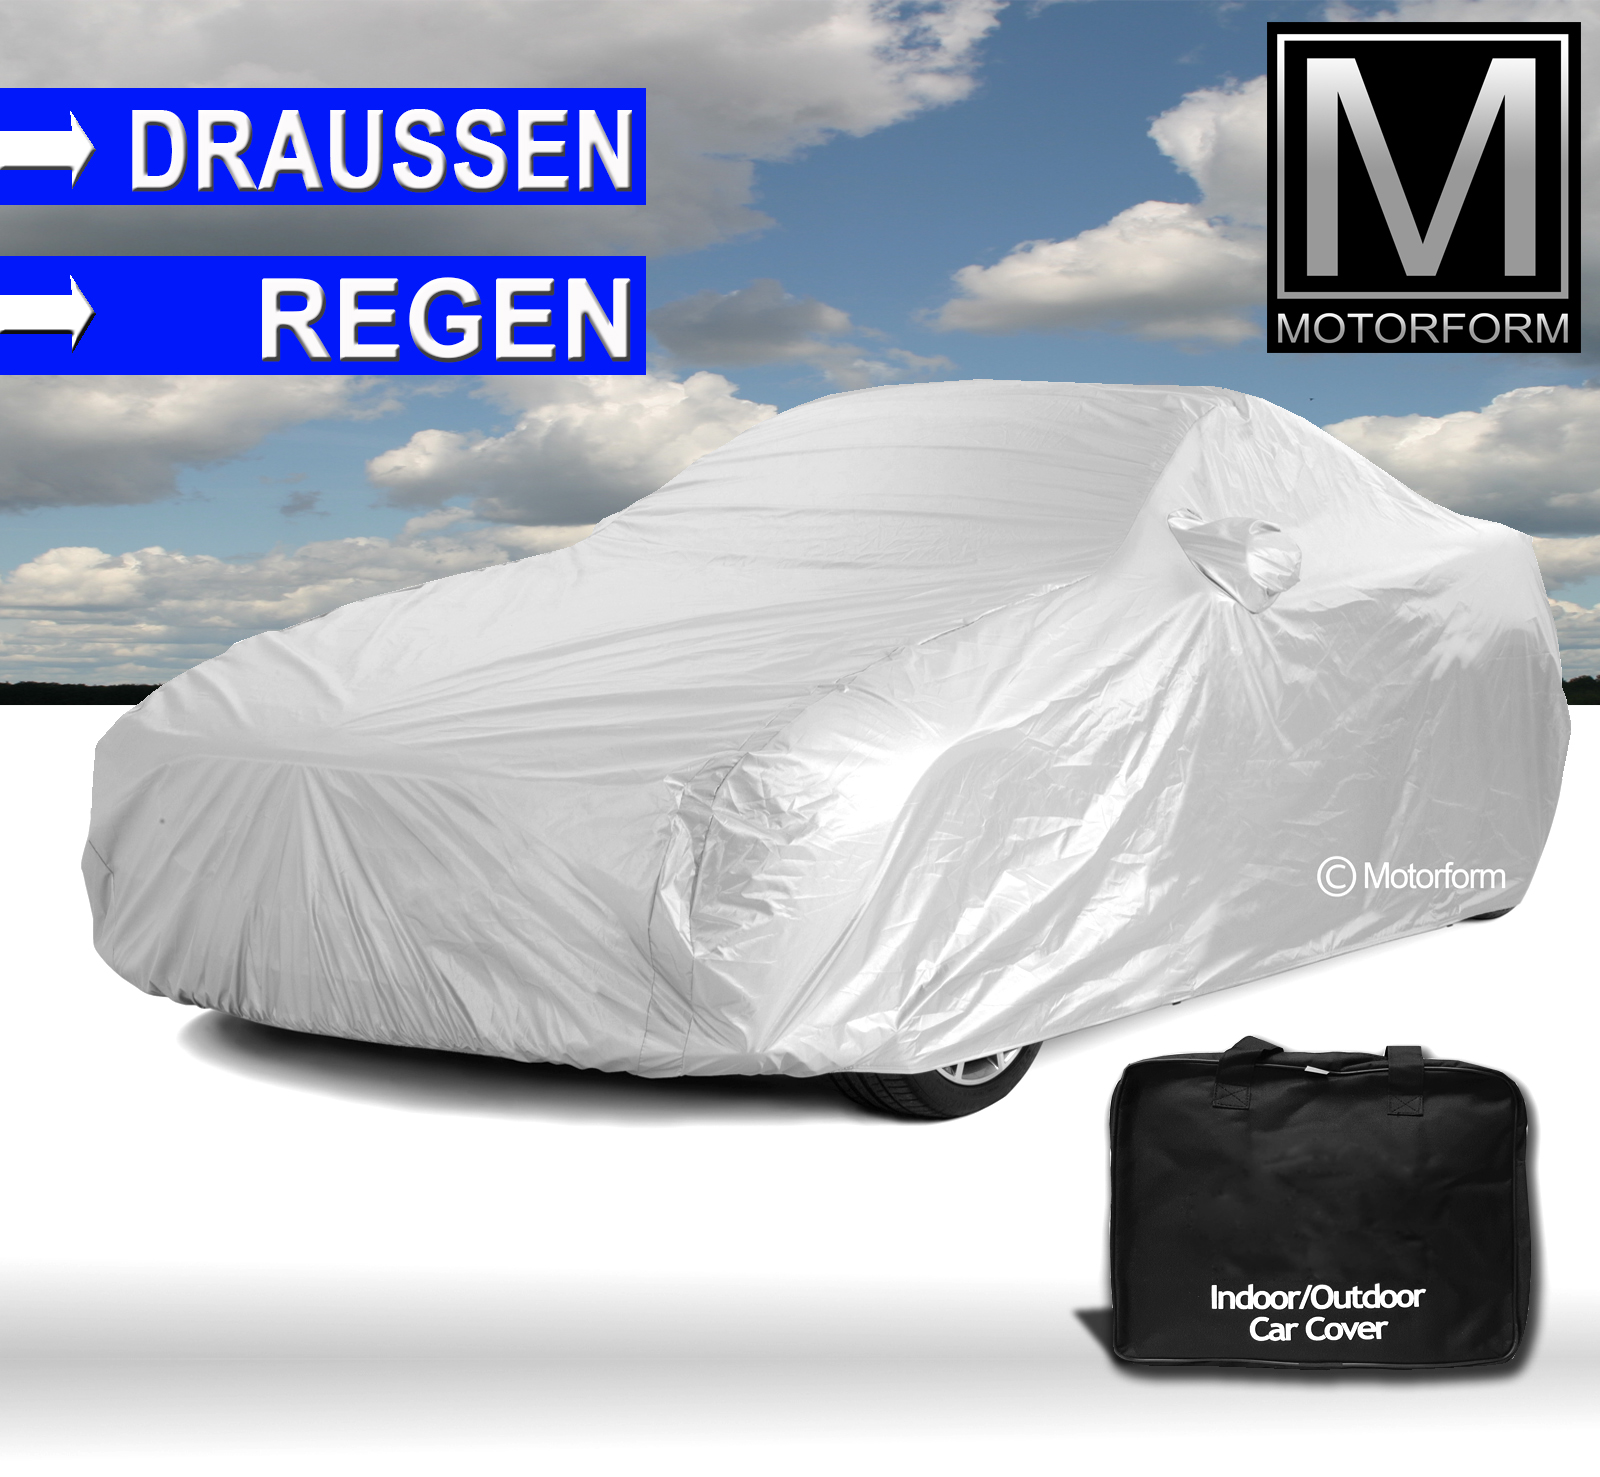 Voyager Outdoor Car Cover for Audi Quattro 1980